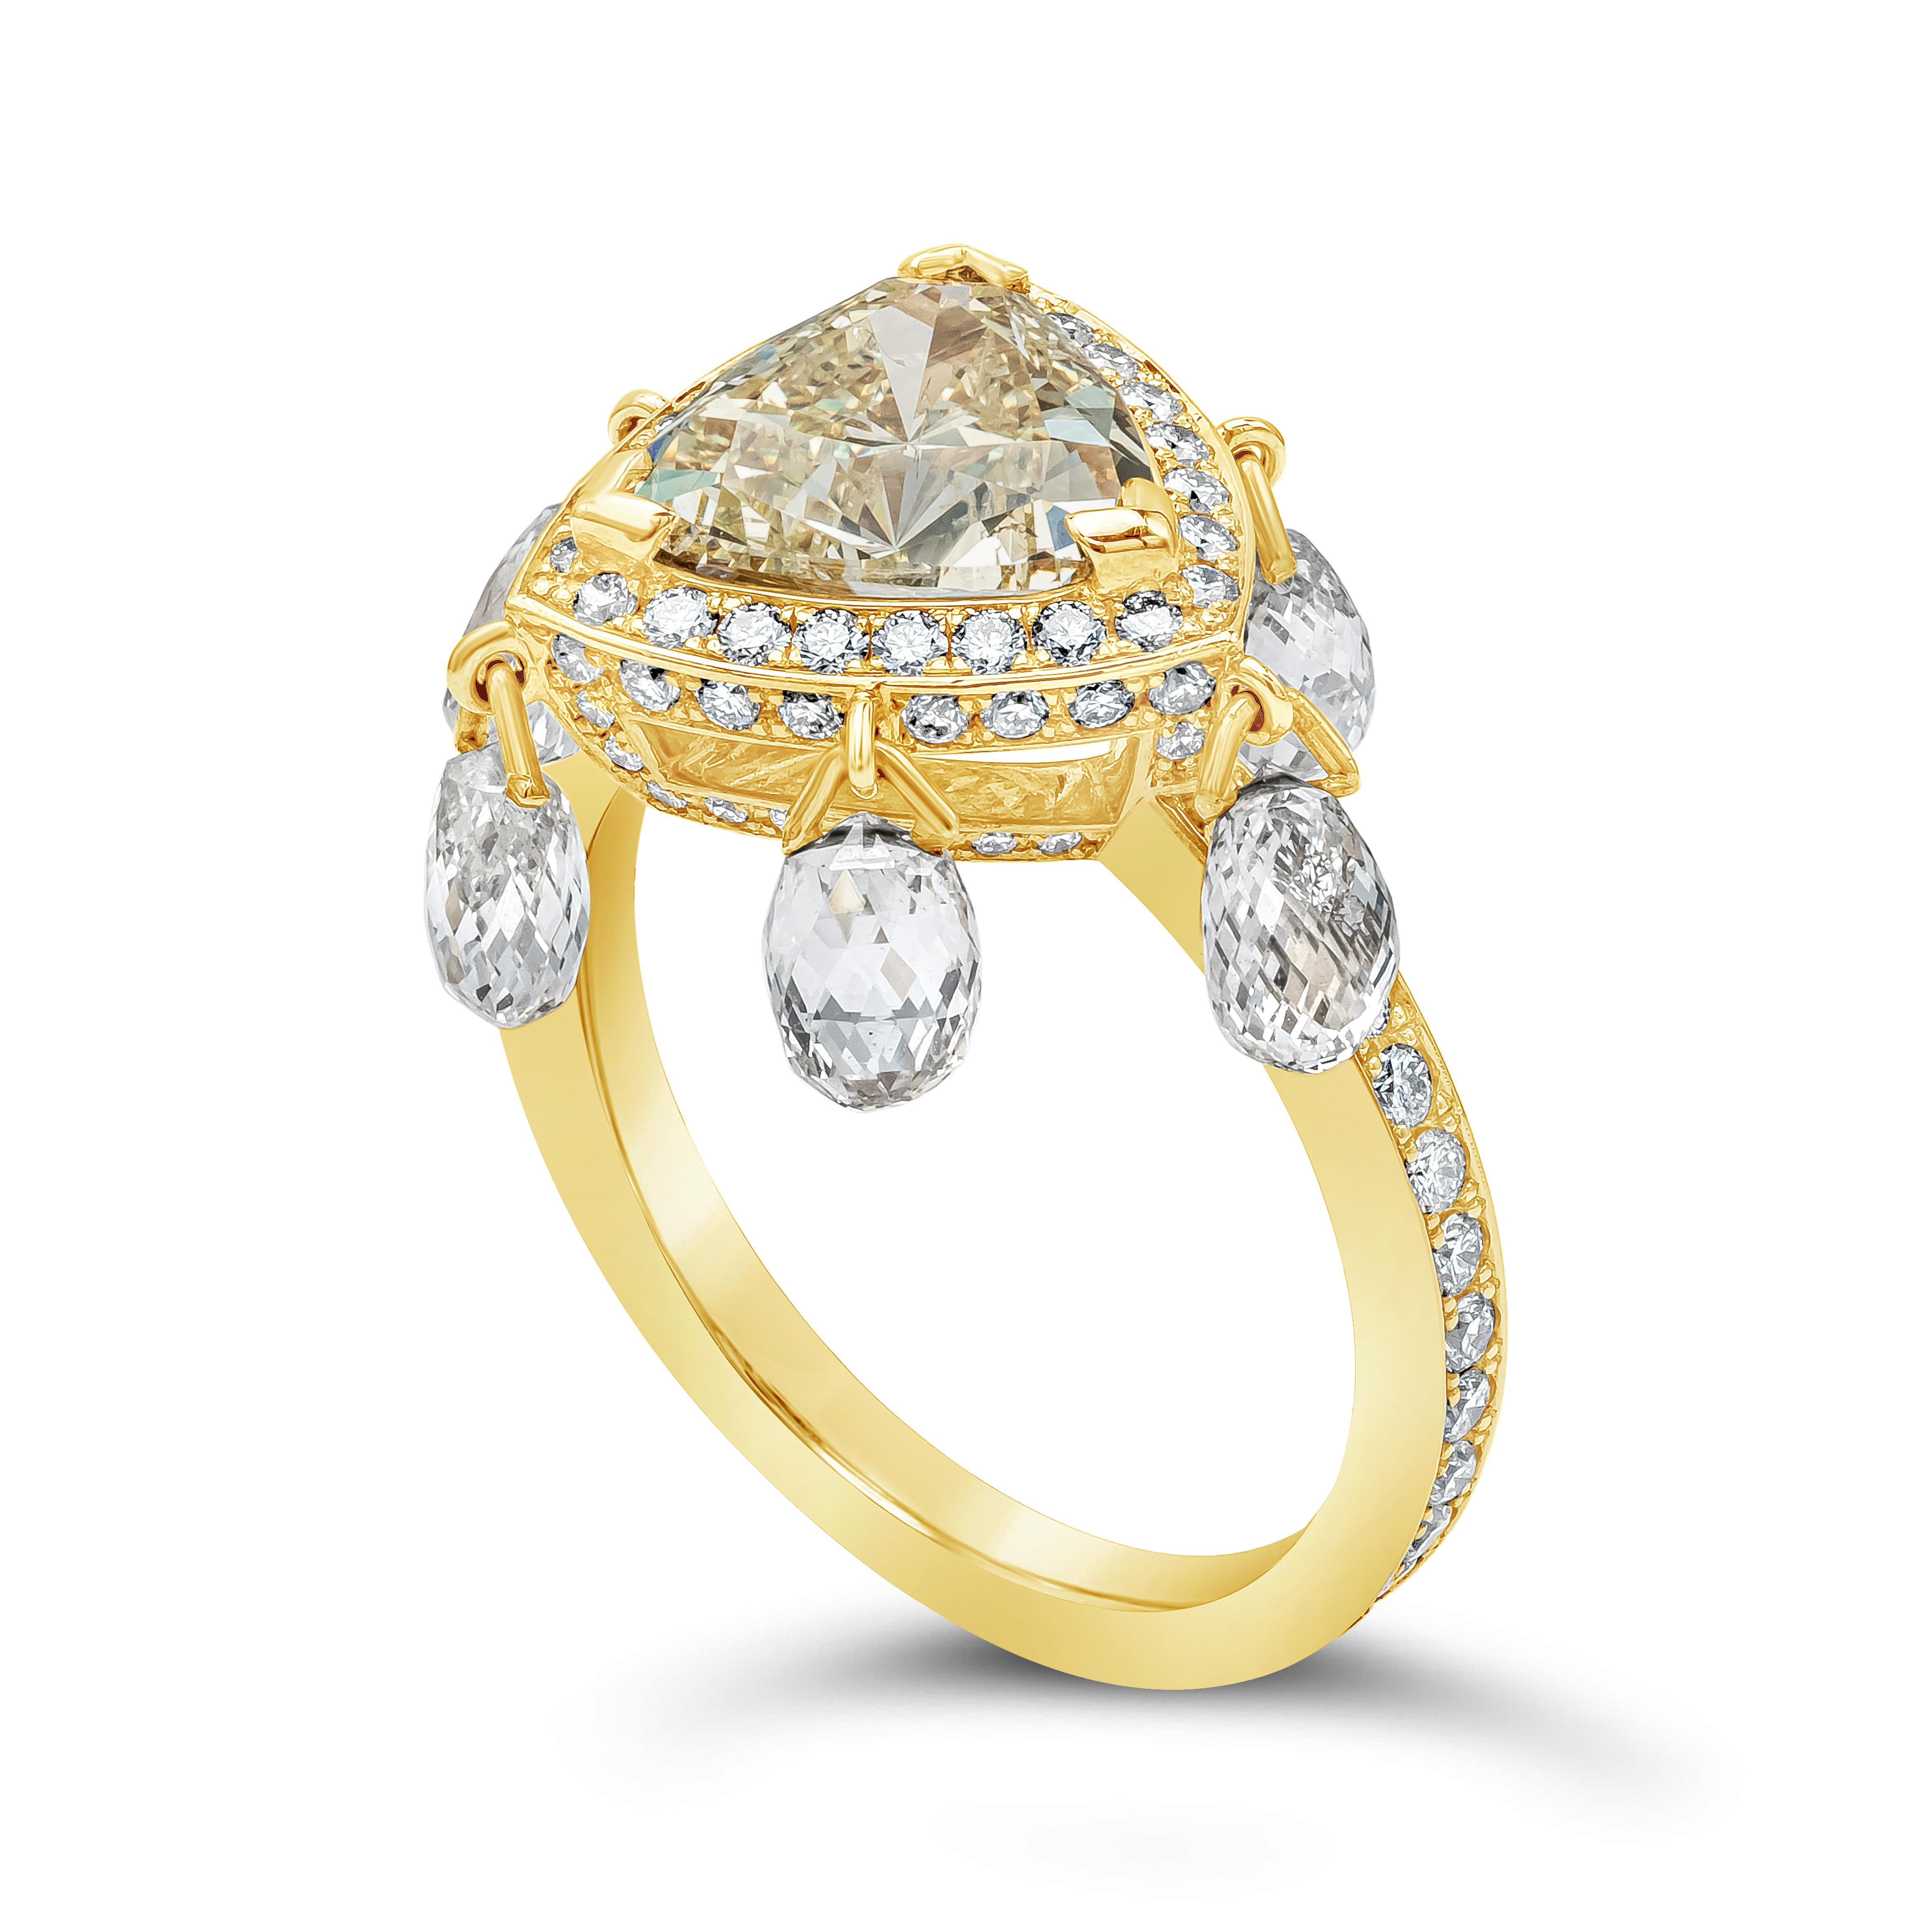 A fascinating and exquisite fashion ring features a triangular yellow diamond weighing 2.02 carats, certified by GIA as Fancy Yellow in color and I1 in clarity, Bezel set in a diamonds encrusted halo design. Accented with six briolette diamonds